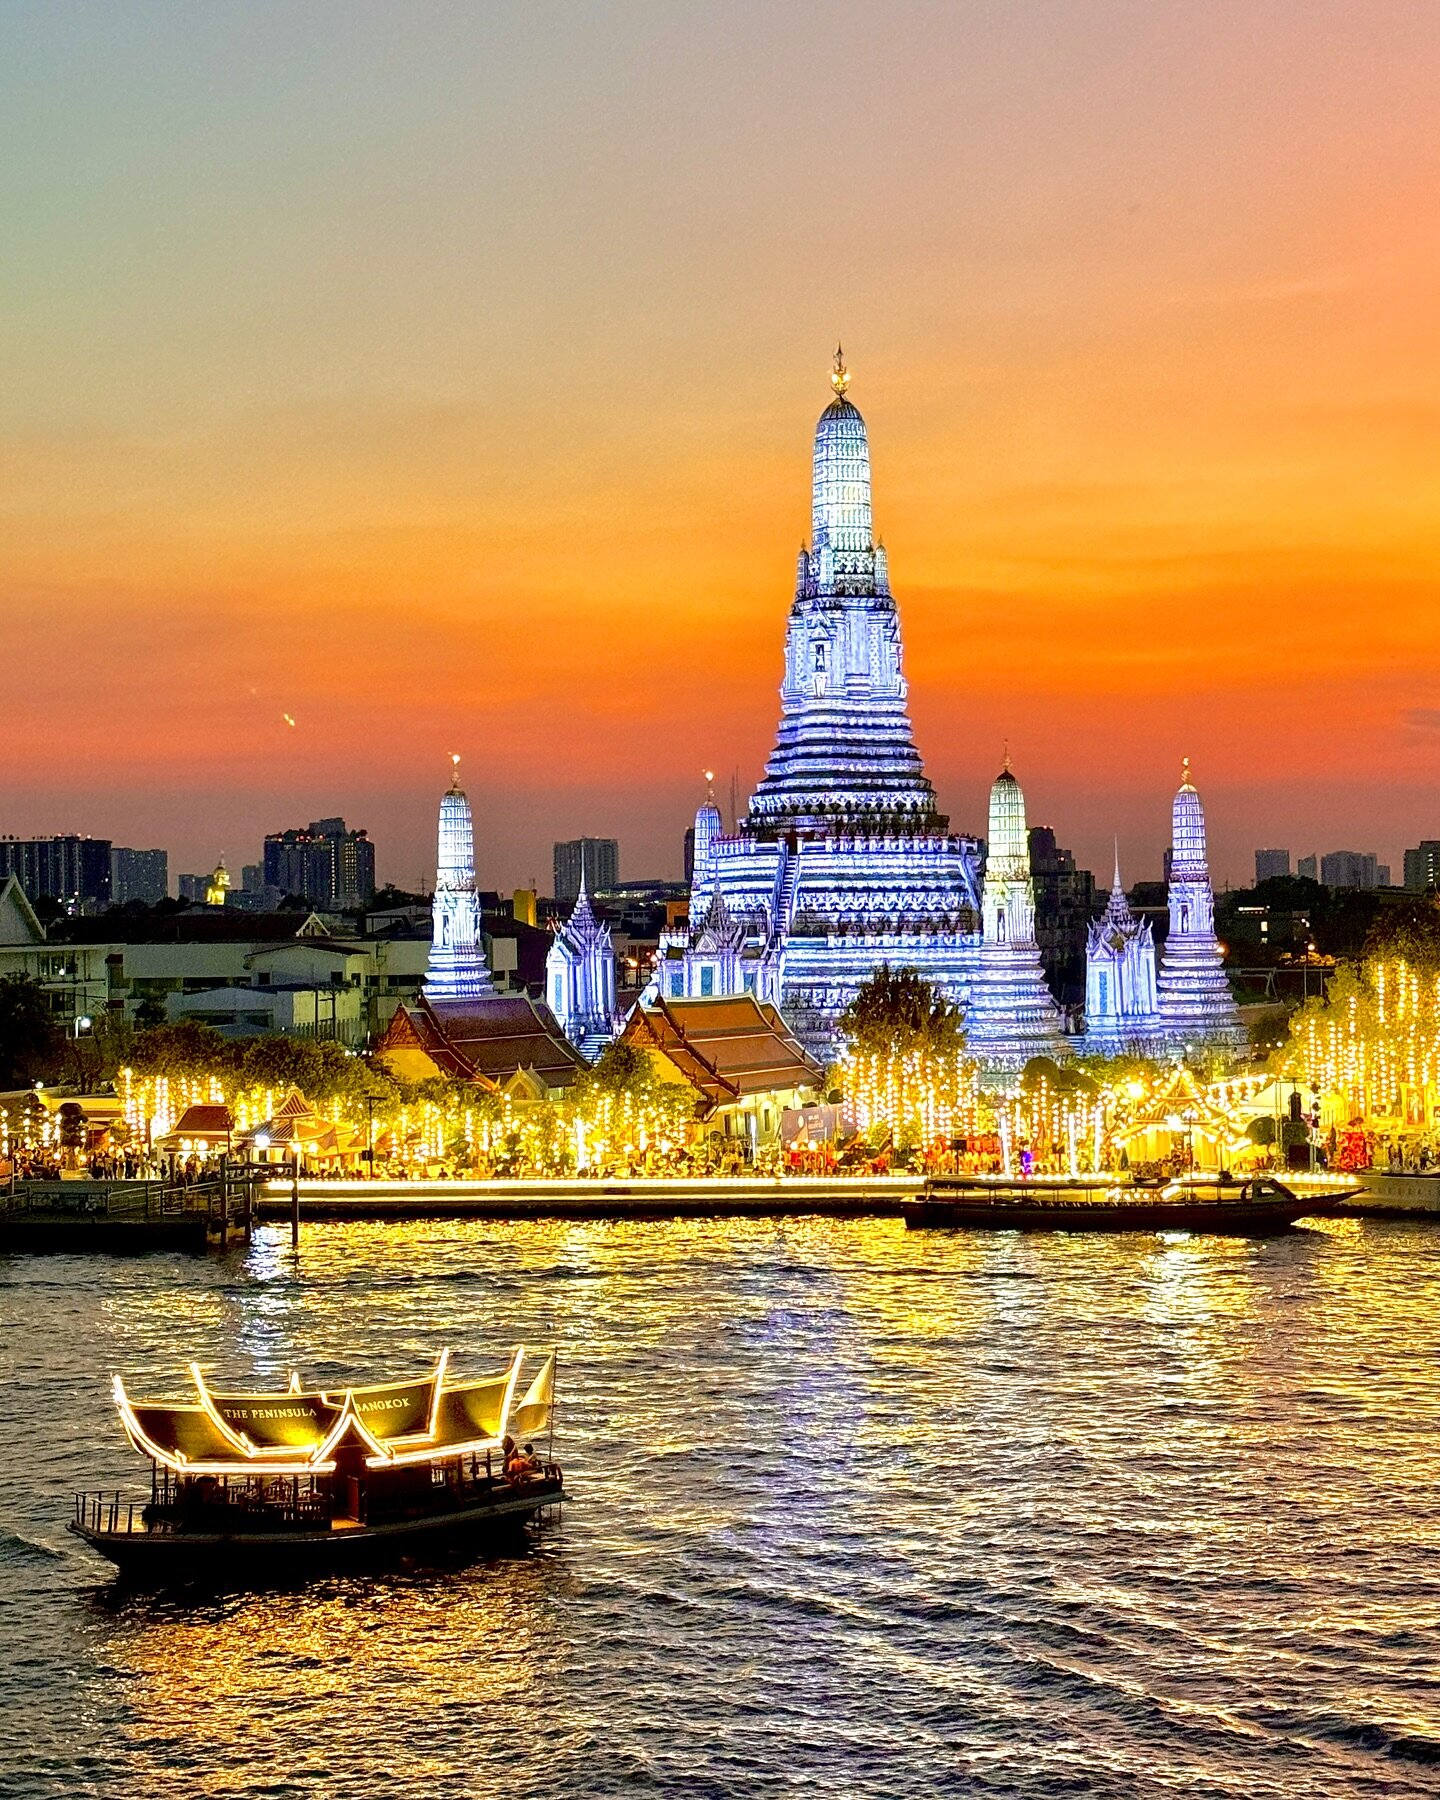 📌 Sunset at Wat Arun Temple │ Bangkok Thailand
🎥 Sala Rattanakosin

✏️ Wat Arun Temple usually lit up every nights. The best time to get a beautiful sunset light at 5.30pm - 7pm

✏️ Wat Arun Temple │ The Landmark of Bangkok - 67 meters │ 220 feet t